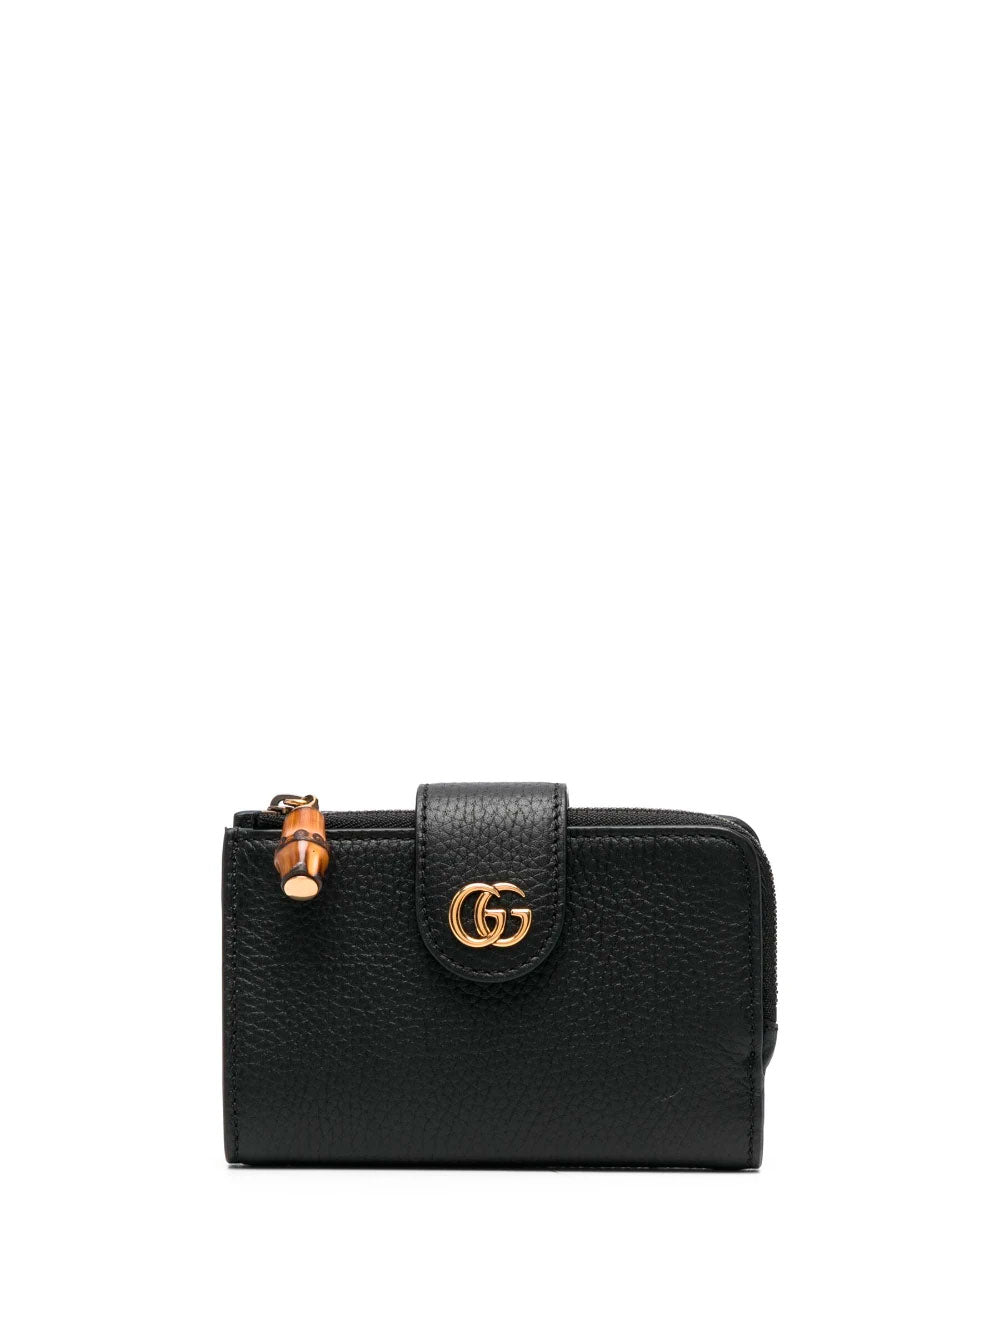 GG grained leather cardholder